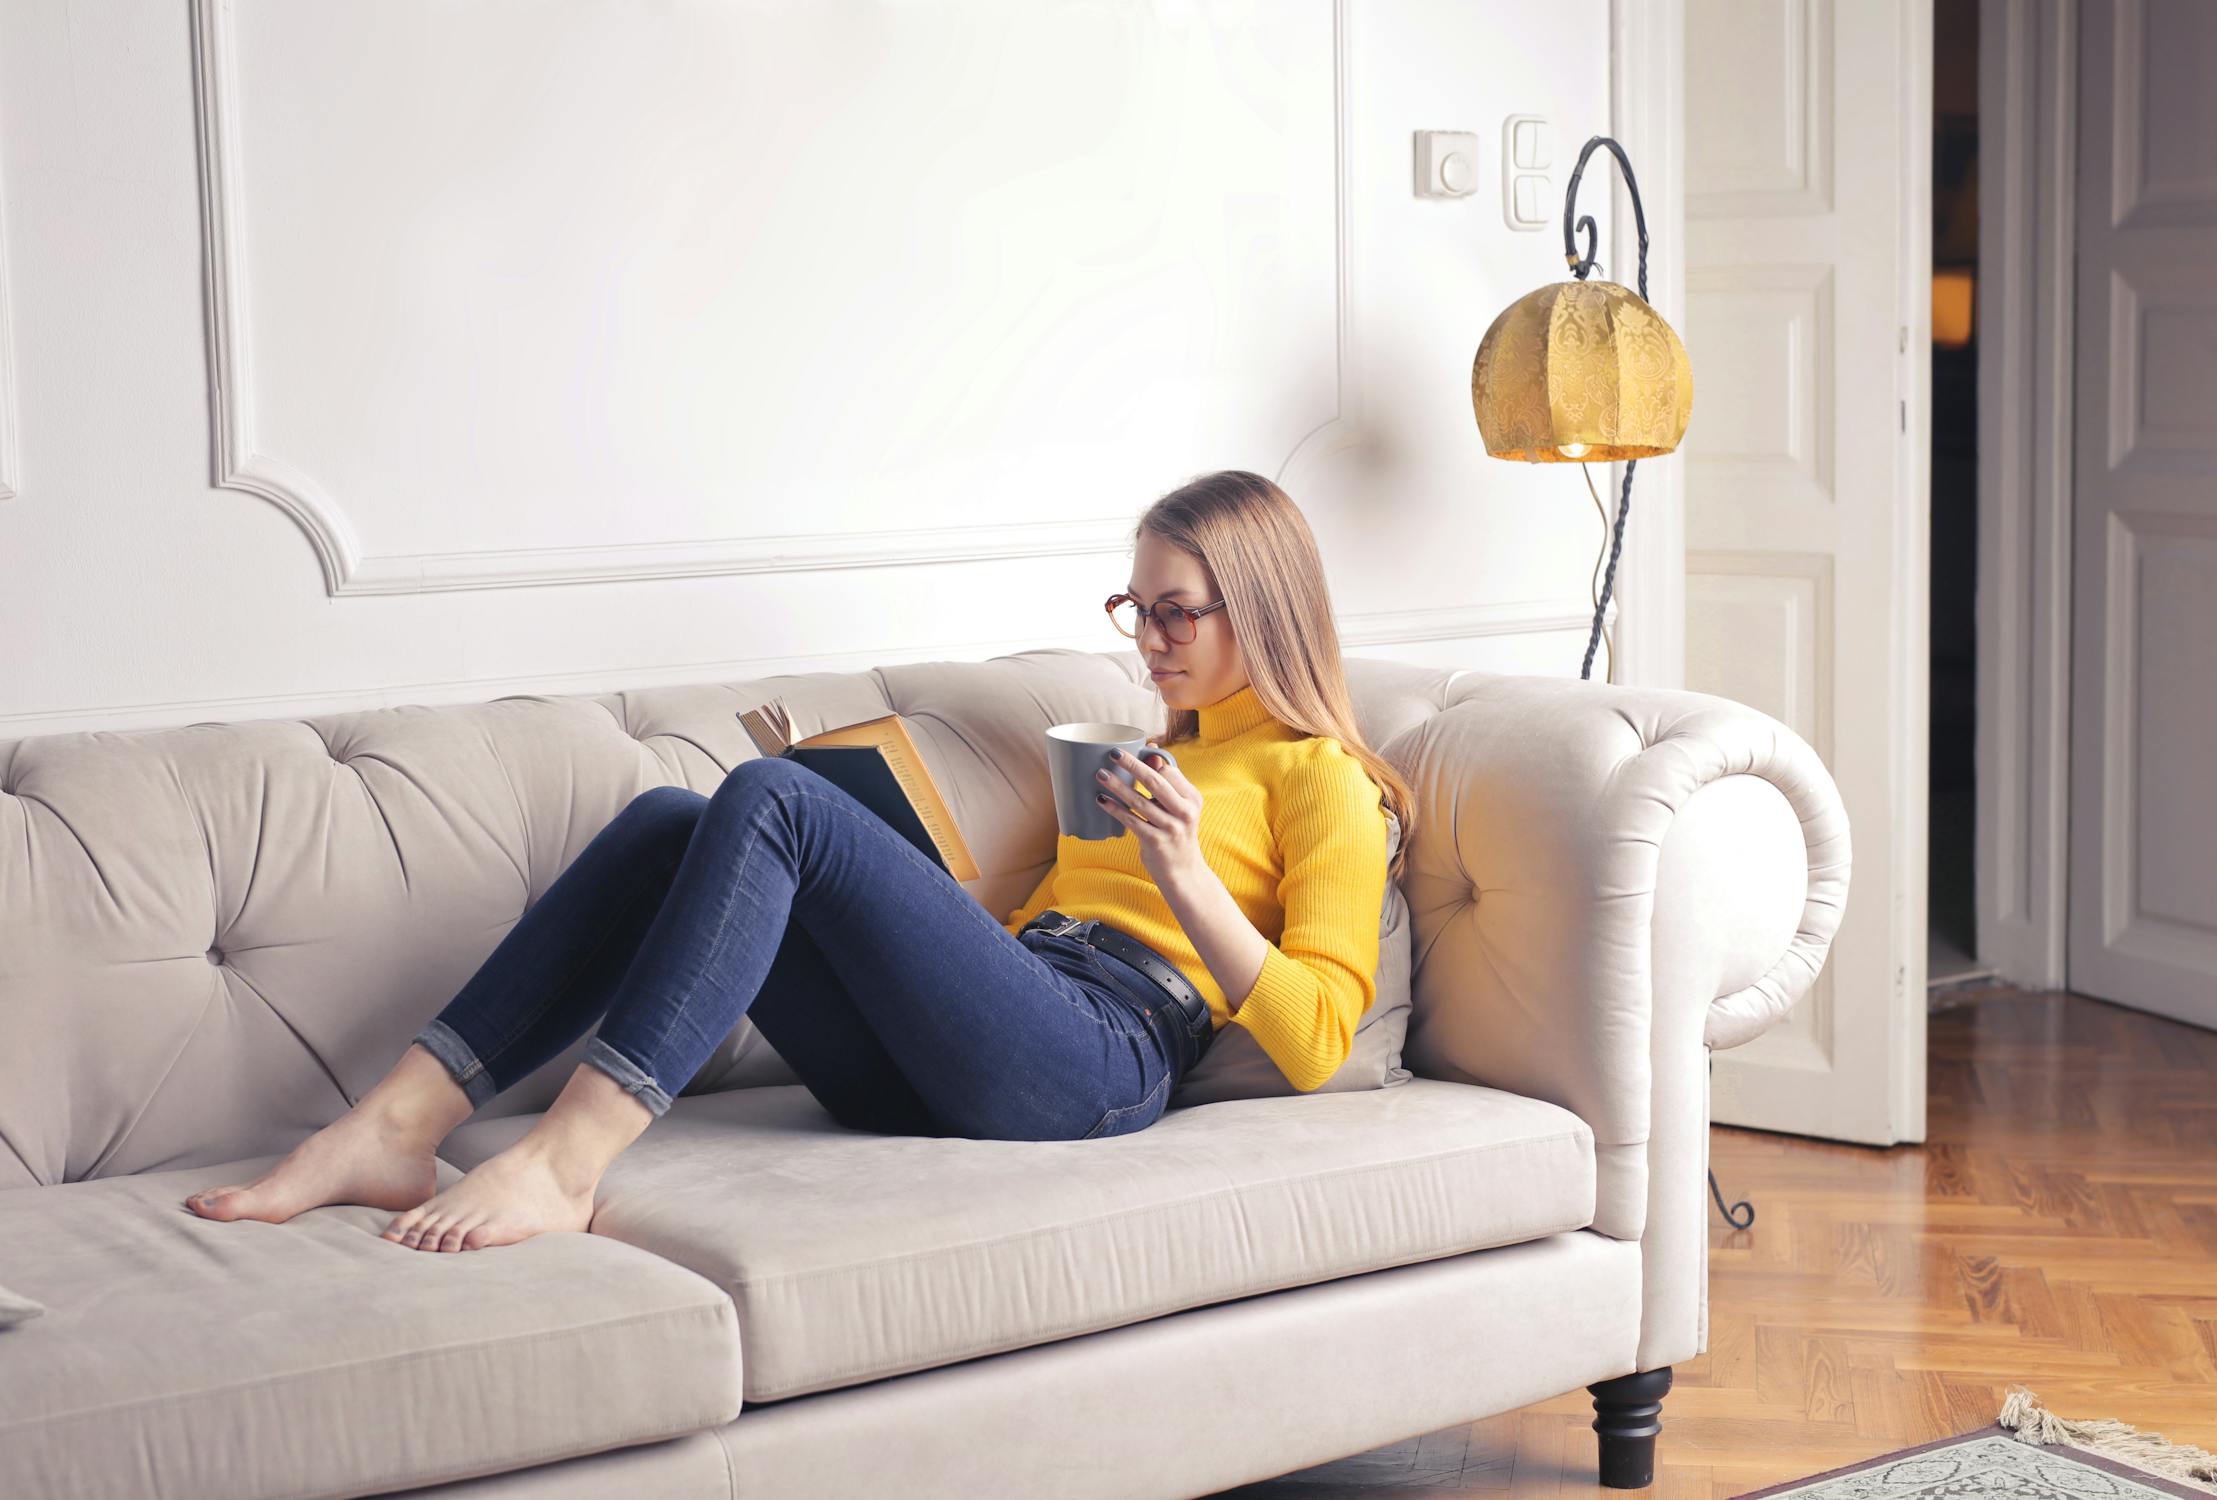 Woman On Couch In Living Room